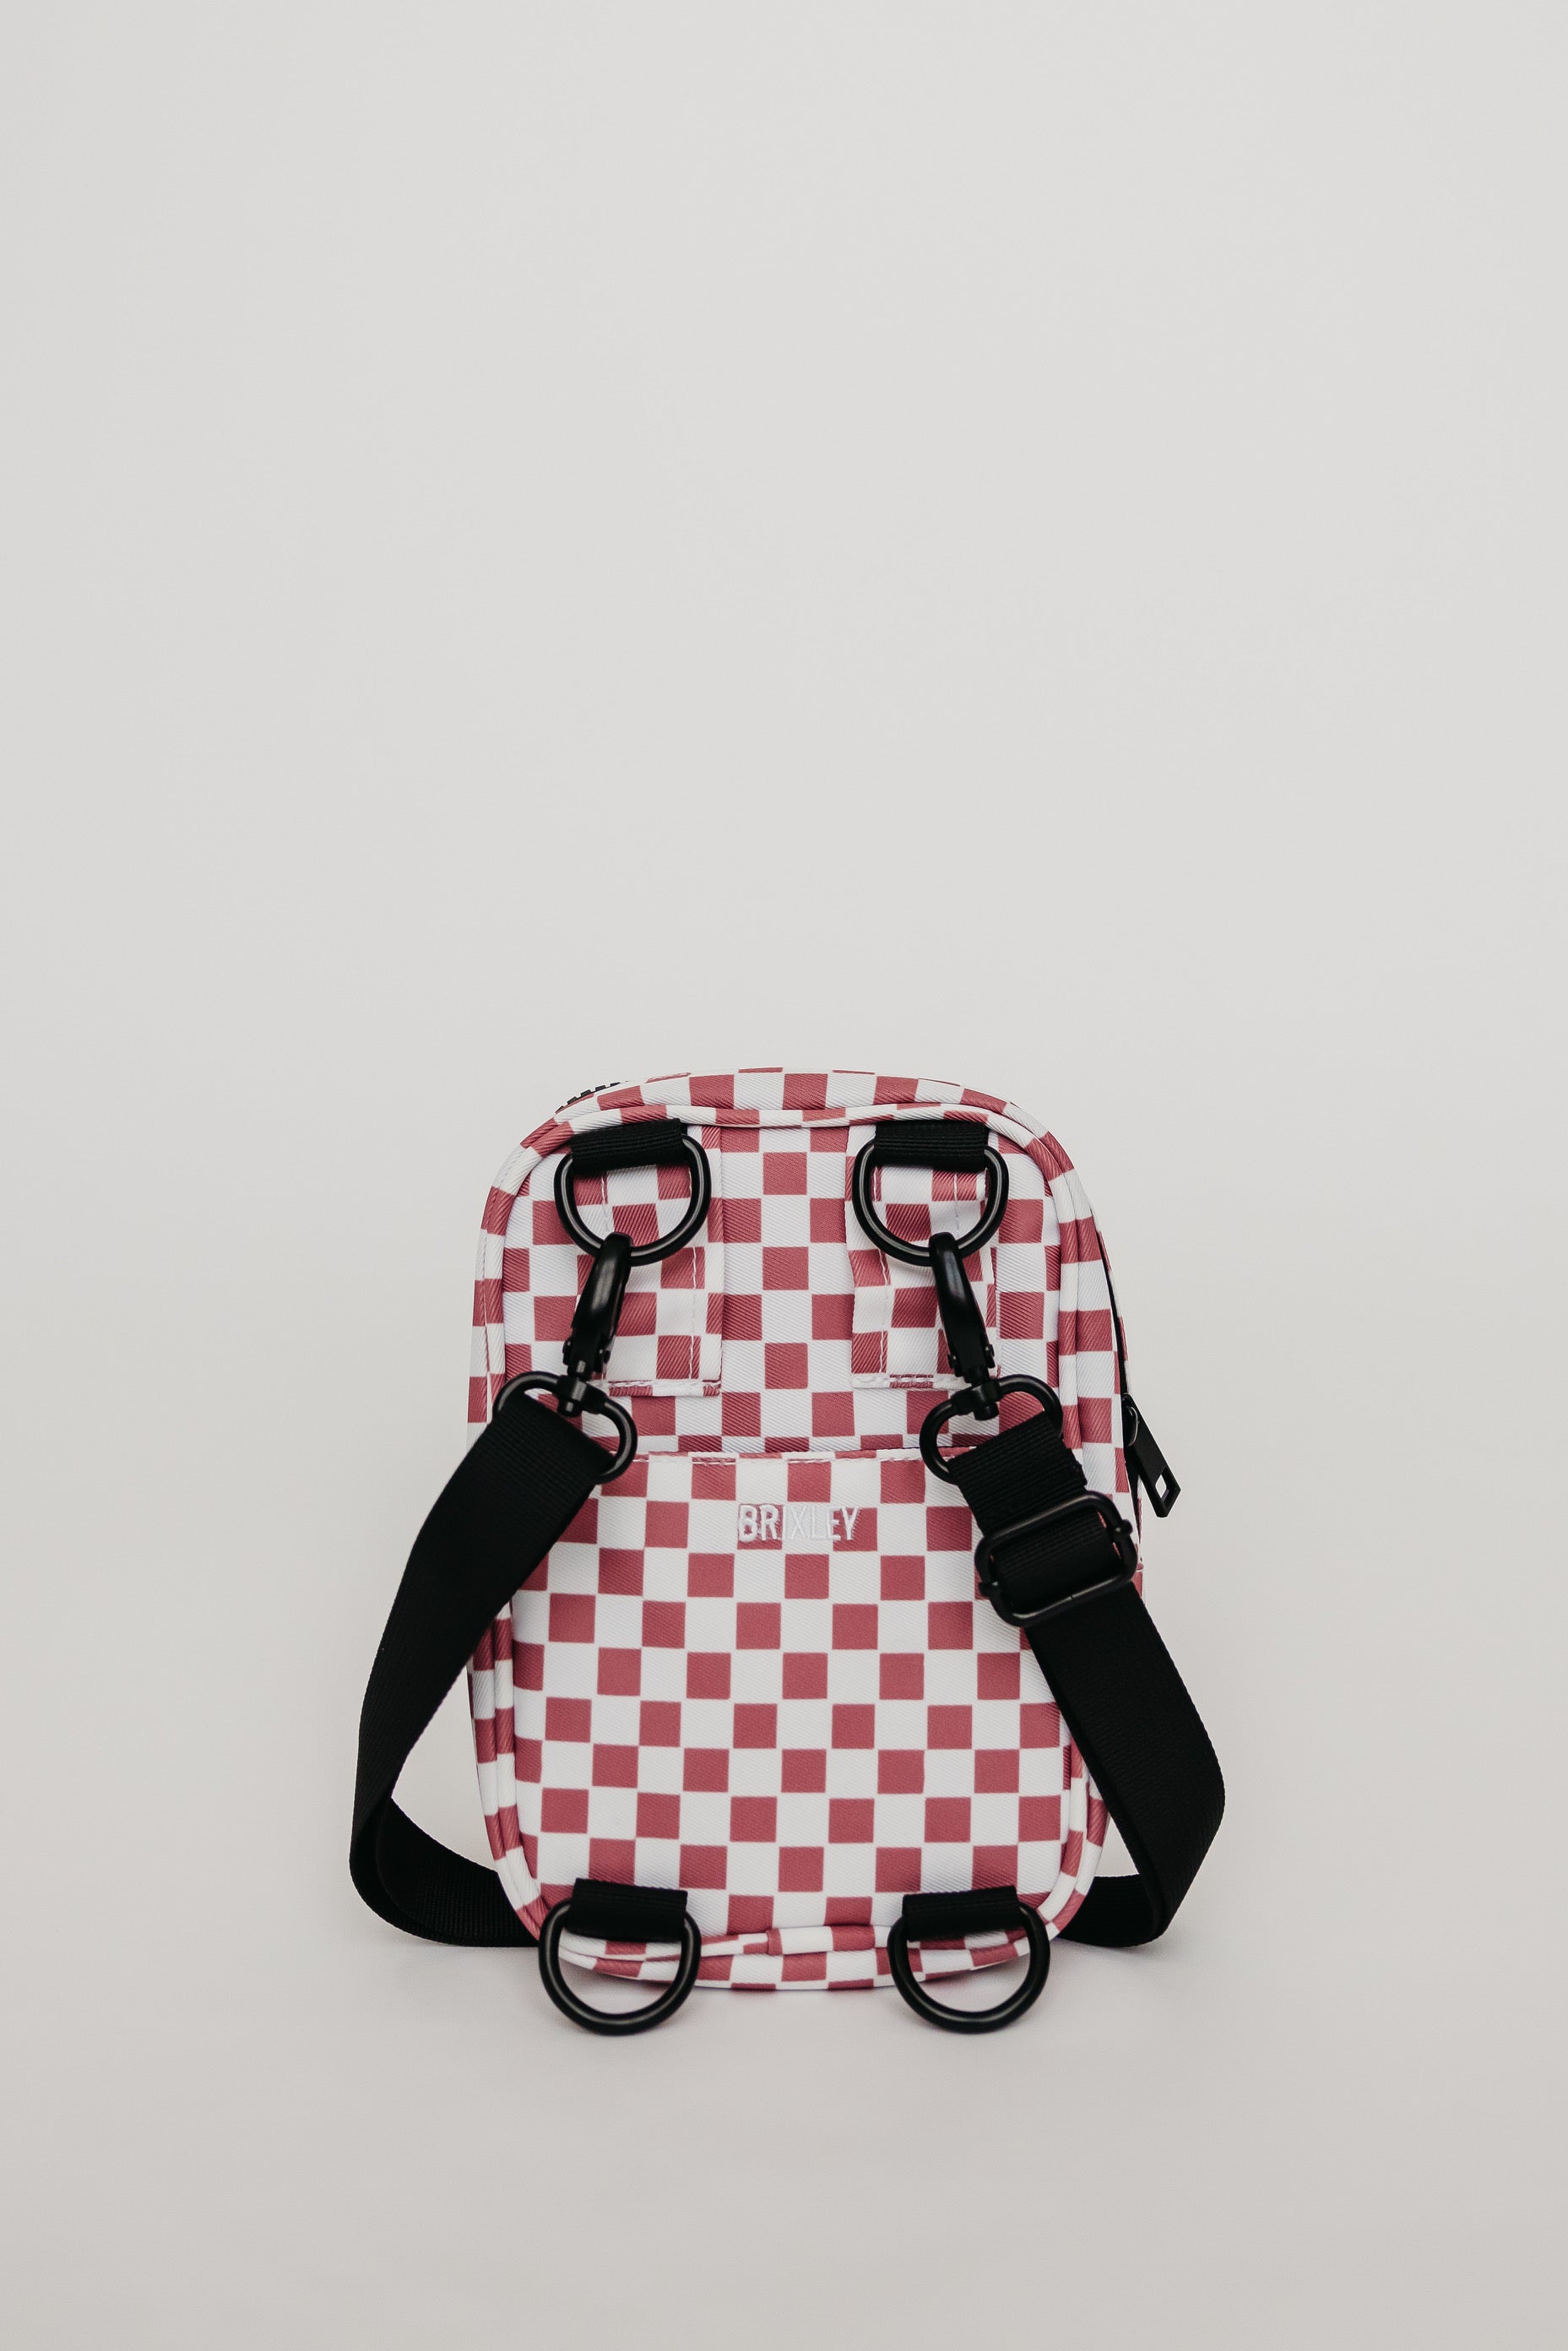 Buy The Checkmate Canvas Reusable Tote Bag, Eco-friendly Vintage Typography  Tote Online in India - Etsy